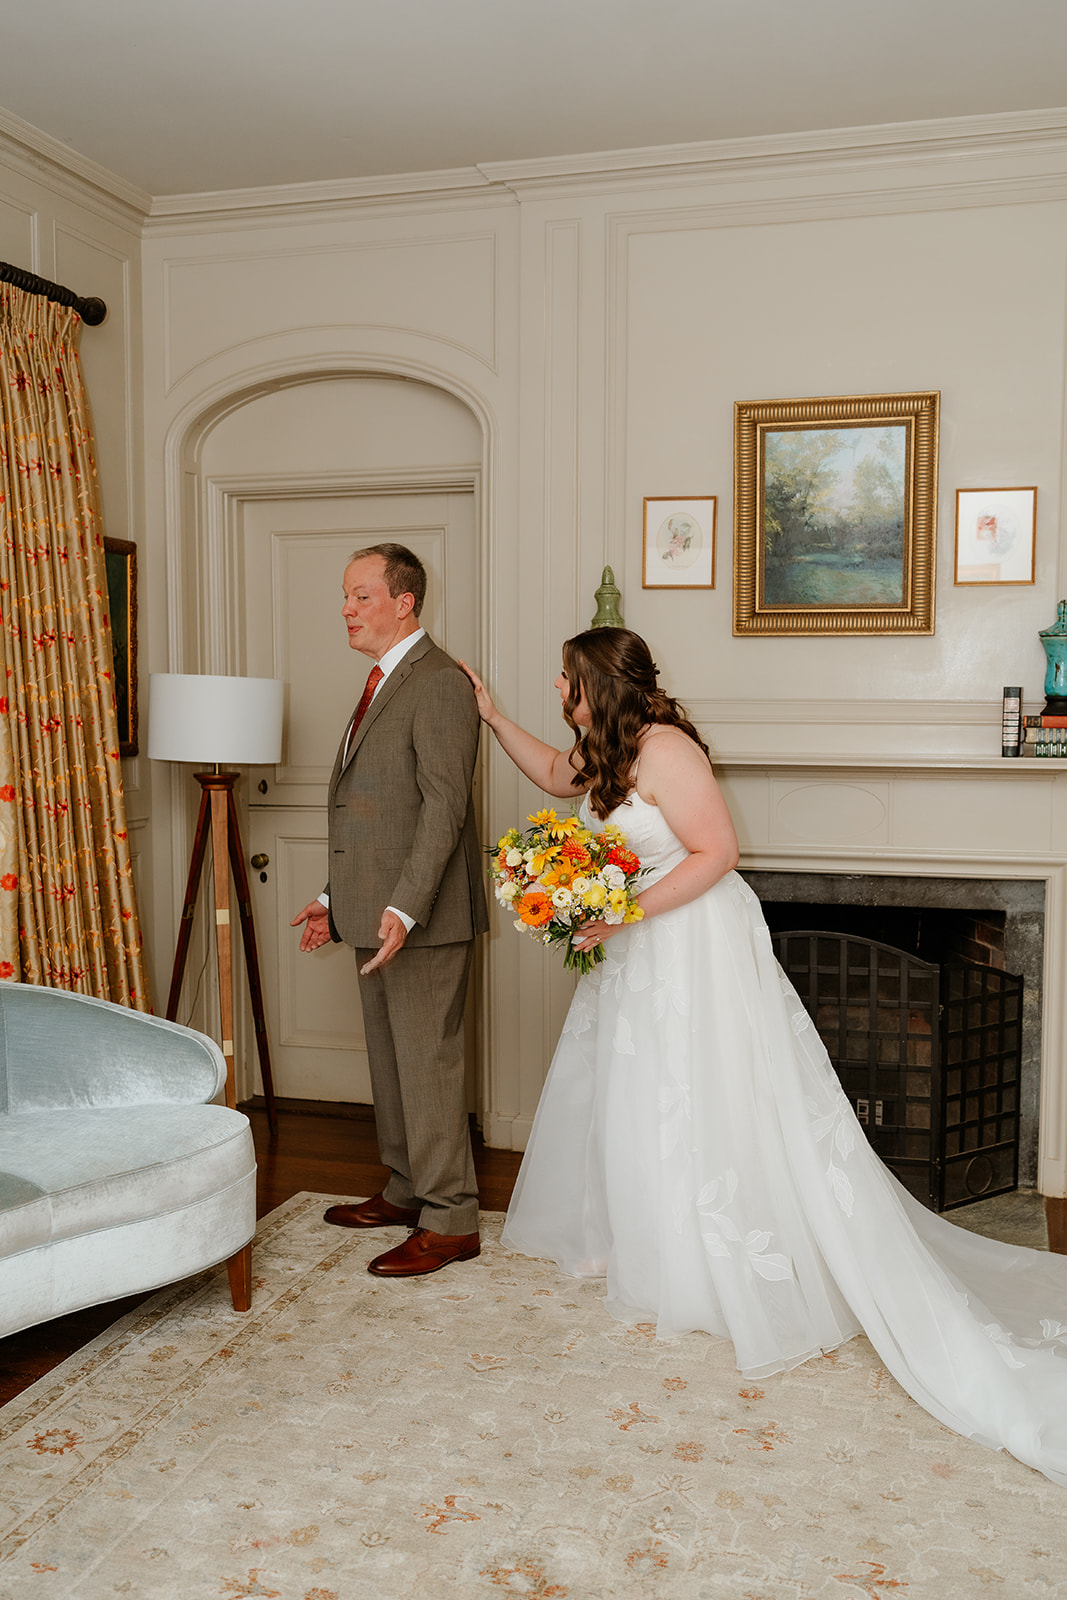 A bride and her father stand in a tastefully decorated room, sharing a moment before the wedding ceremony.